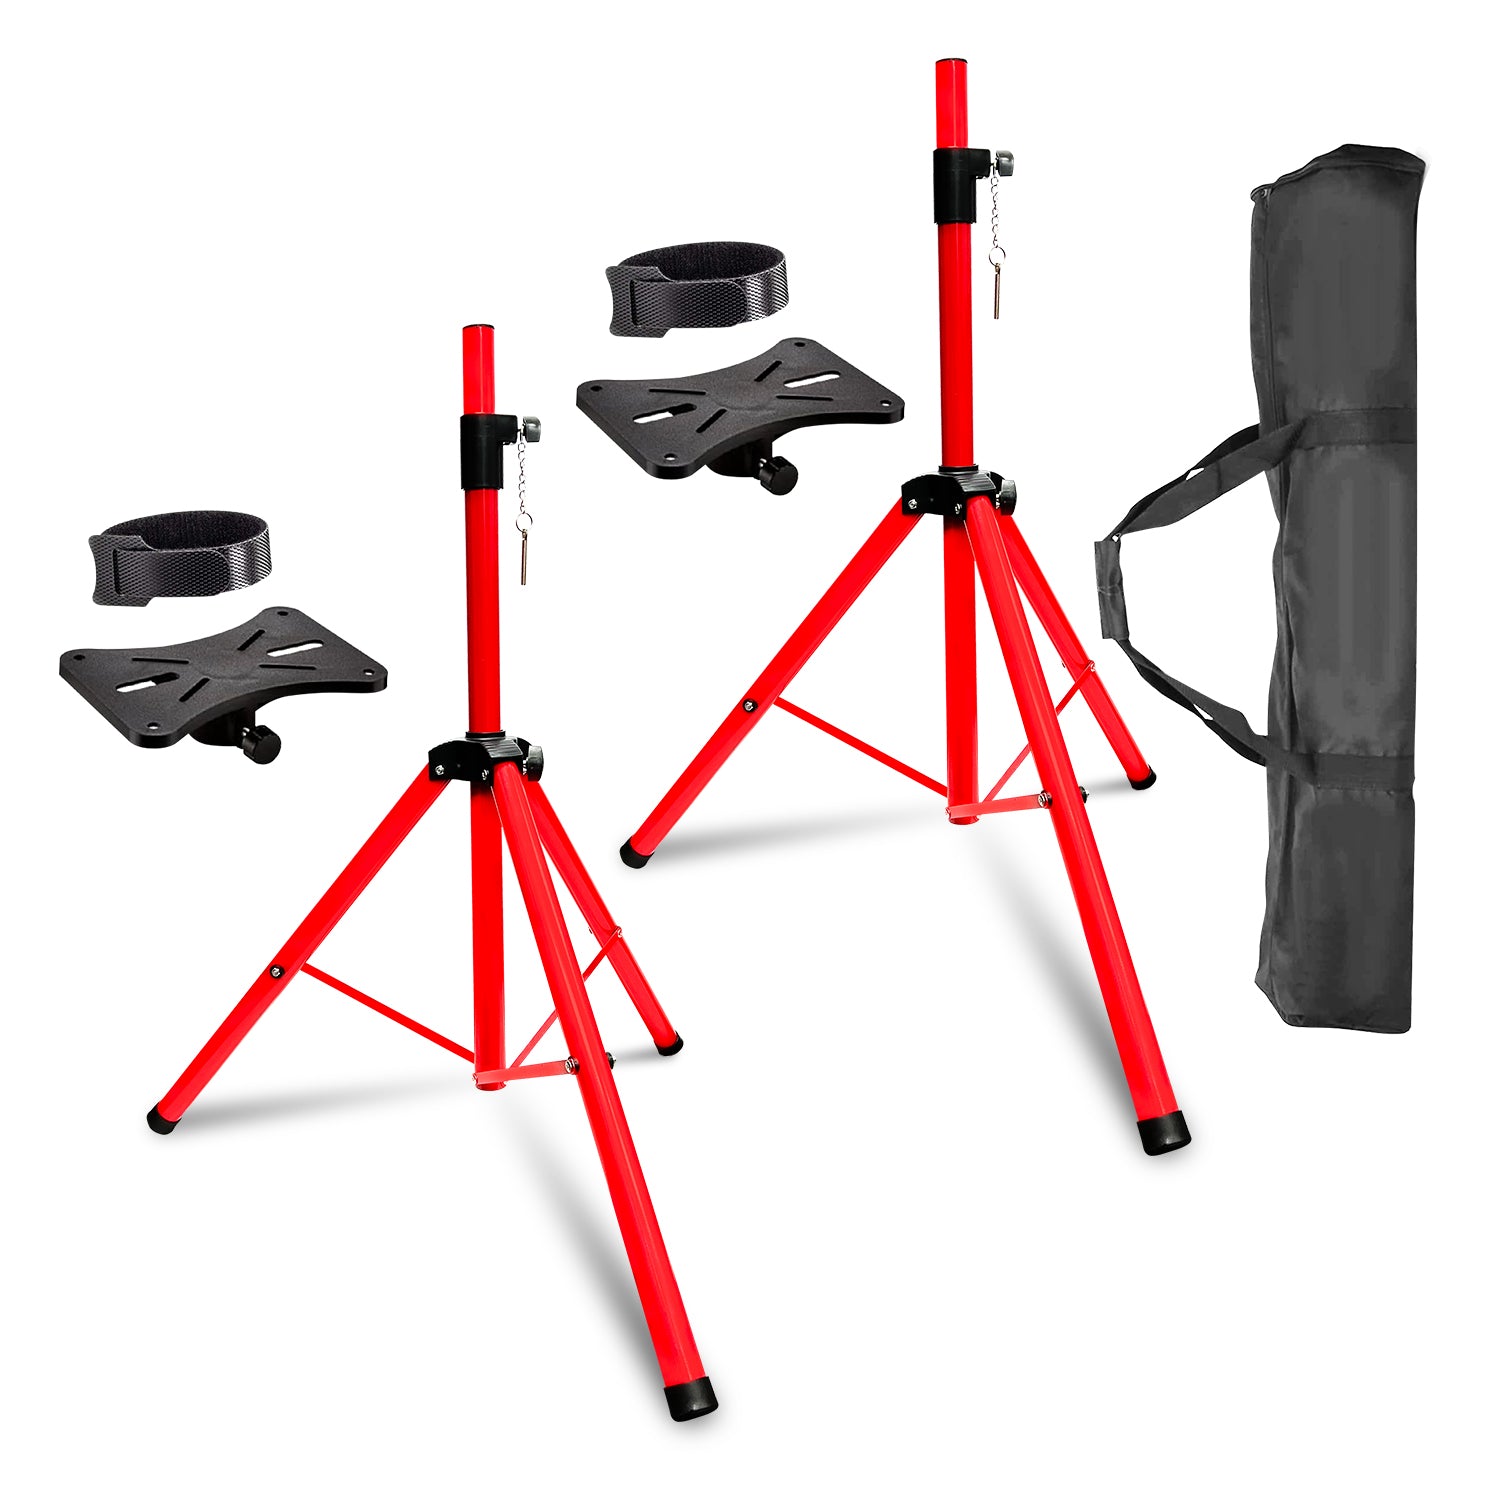 5Core Speaker Stands Tripod Tall DJ Studio Monitor stands 72" Pole Mount Red with Bag